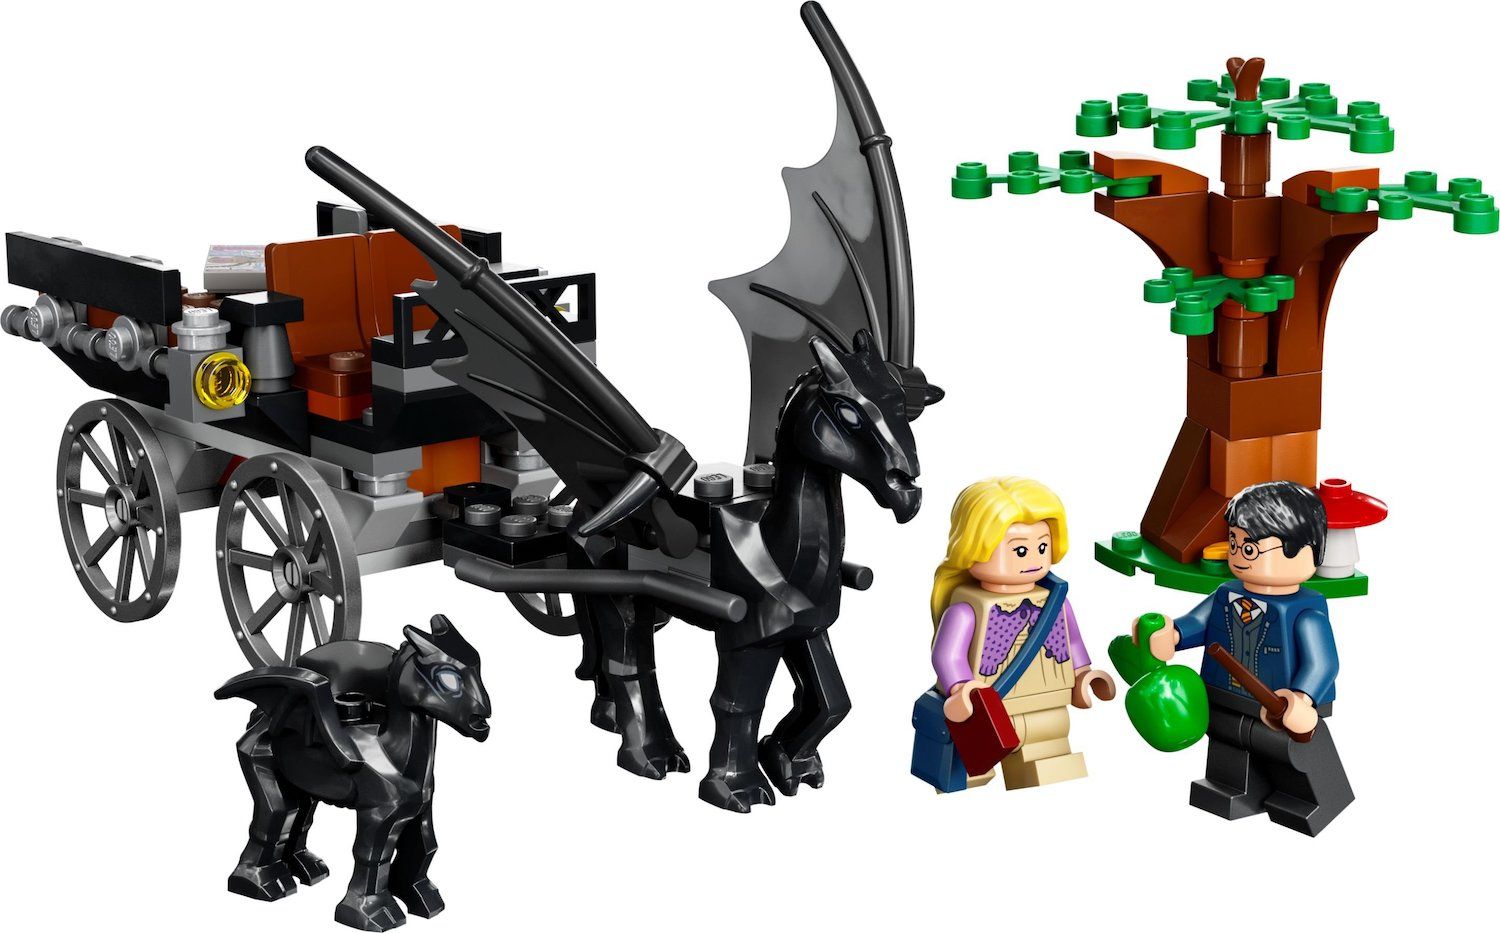 Guide to all the new Summer 2022 LEGO Harry Potter Sets - Jay's